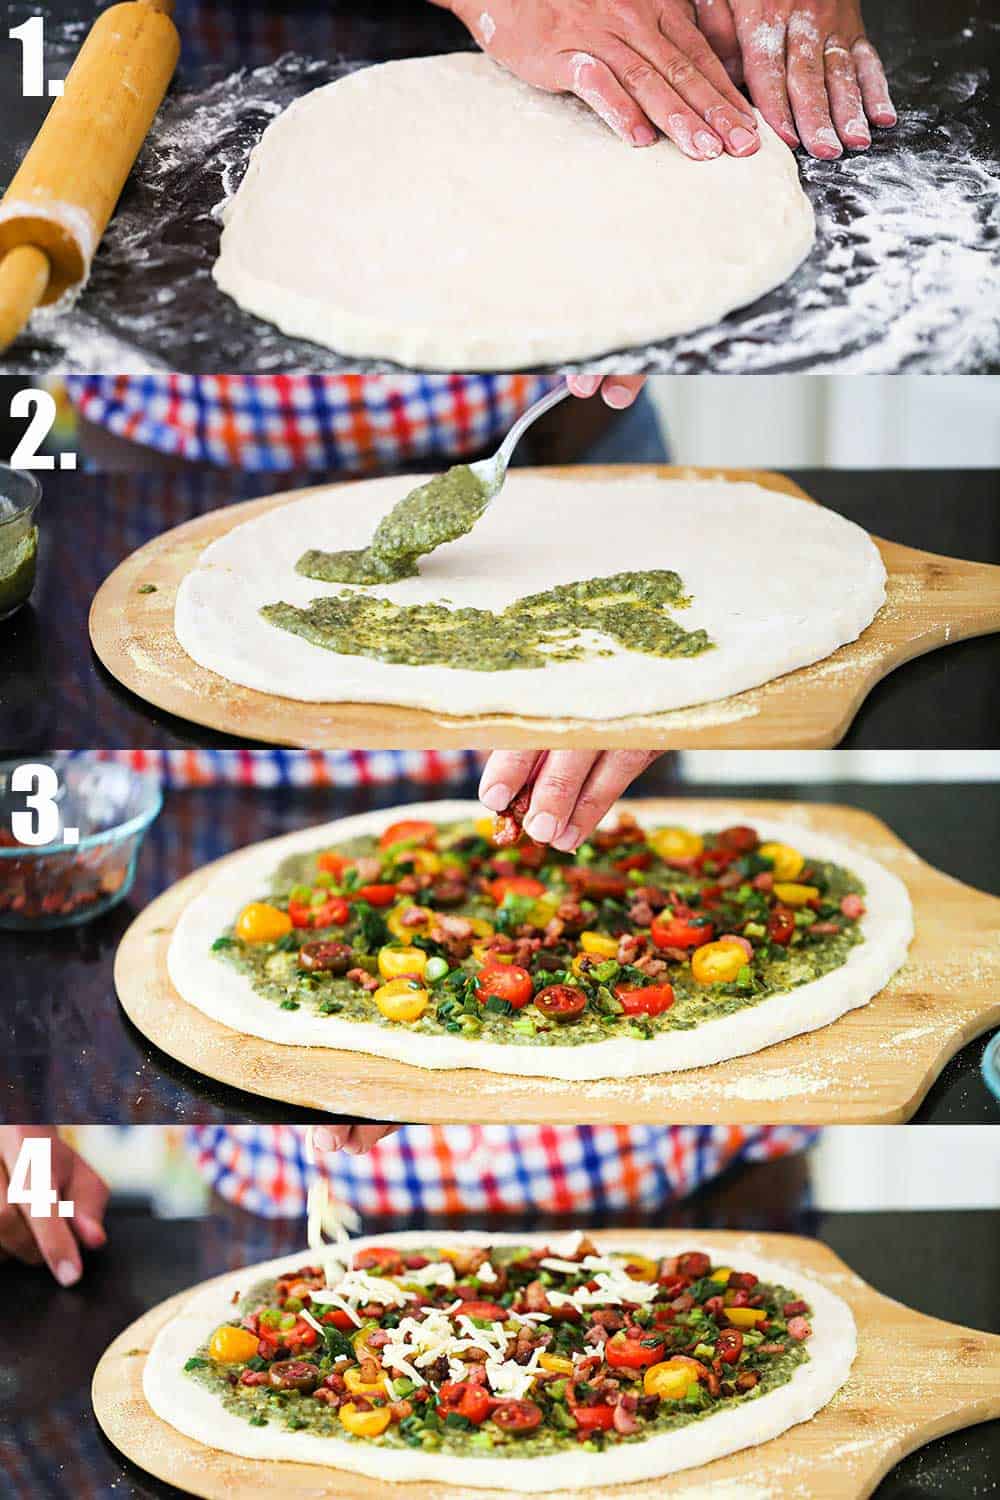 4 shots: 1st, two hands forming a pizza dough on a floured counter, 2nd: a hand using a spoon to spread pesto sauce on the dough, 3rd: a hand layering sliced cherry tomatoes on the pizza, and the 4th: a hand sprinkling white cheese on the pizza.